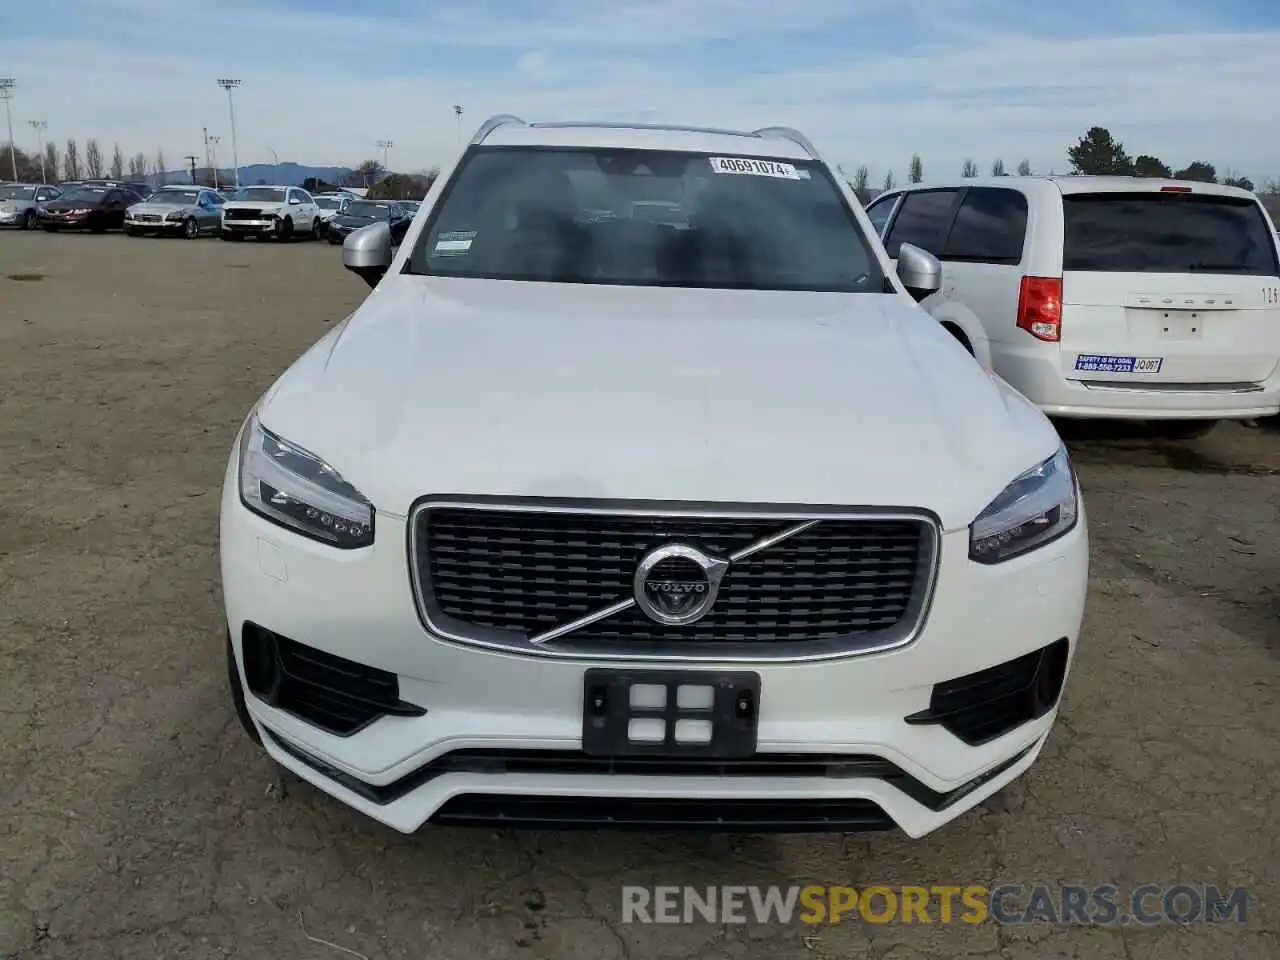 5 Photograph of a damaged car YV4A22PMXK1469190 VOLVO XC90 2019